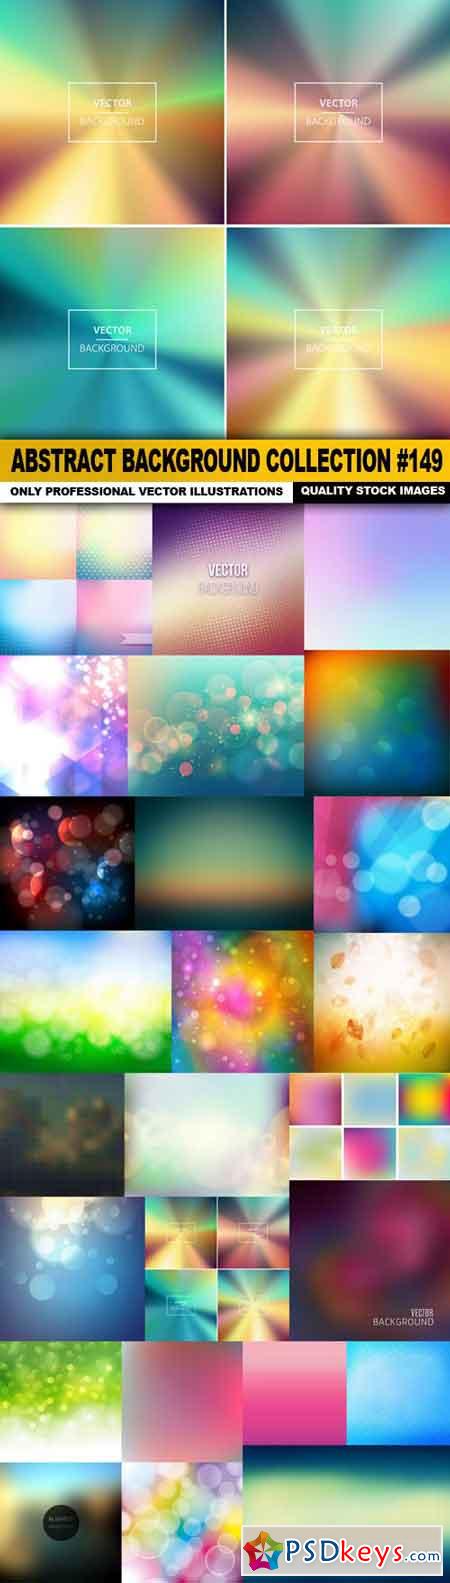 Abstract Background Collection #149 - 25 Vector